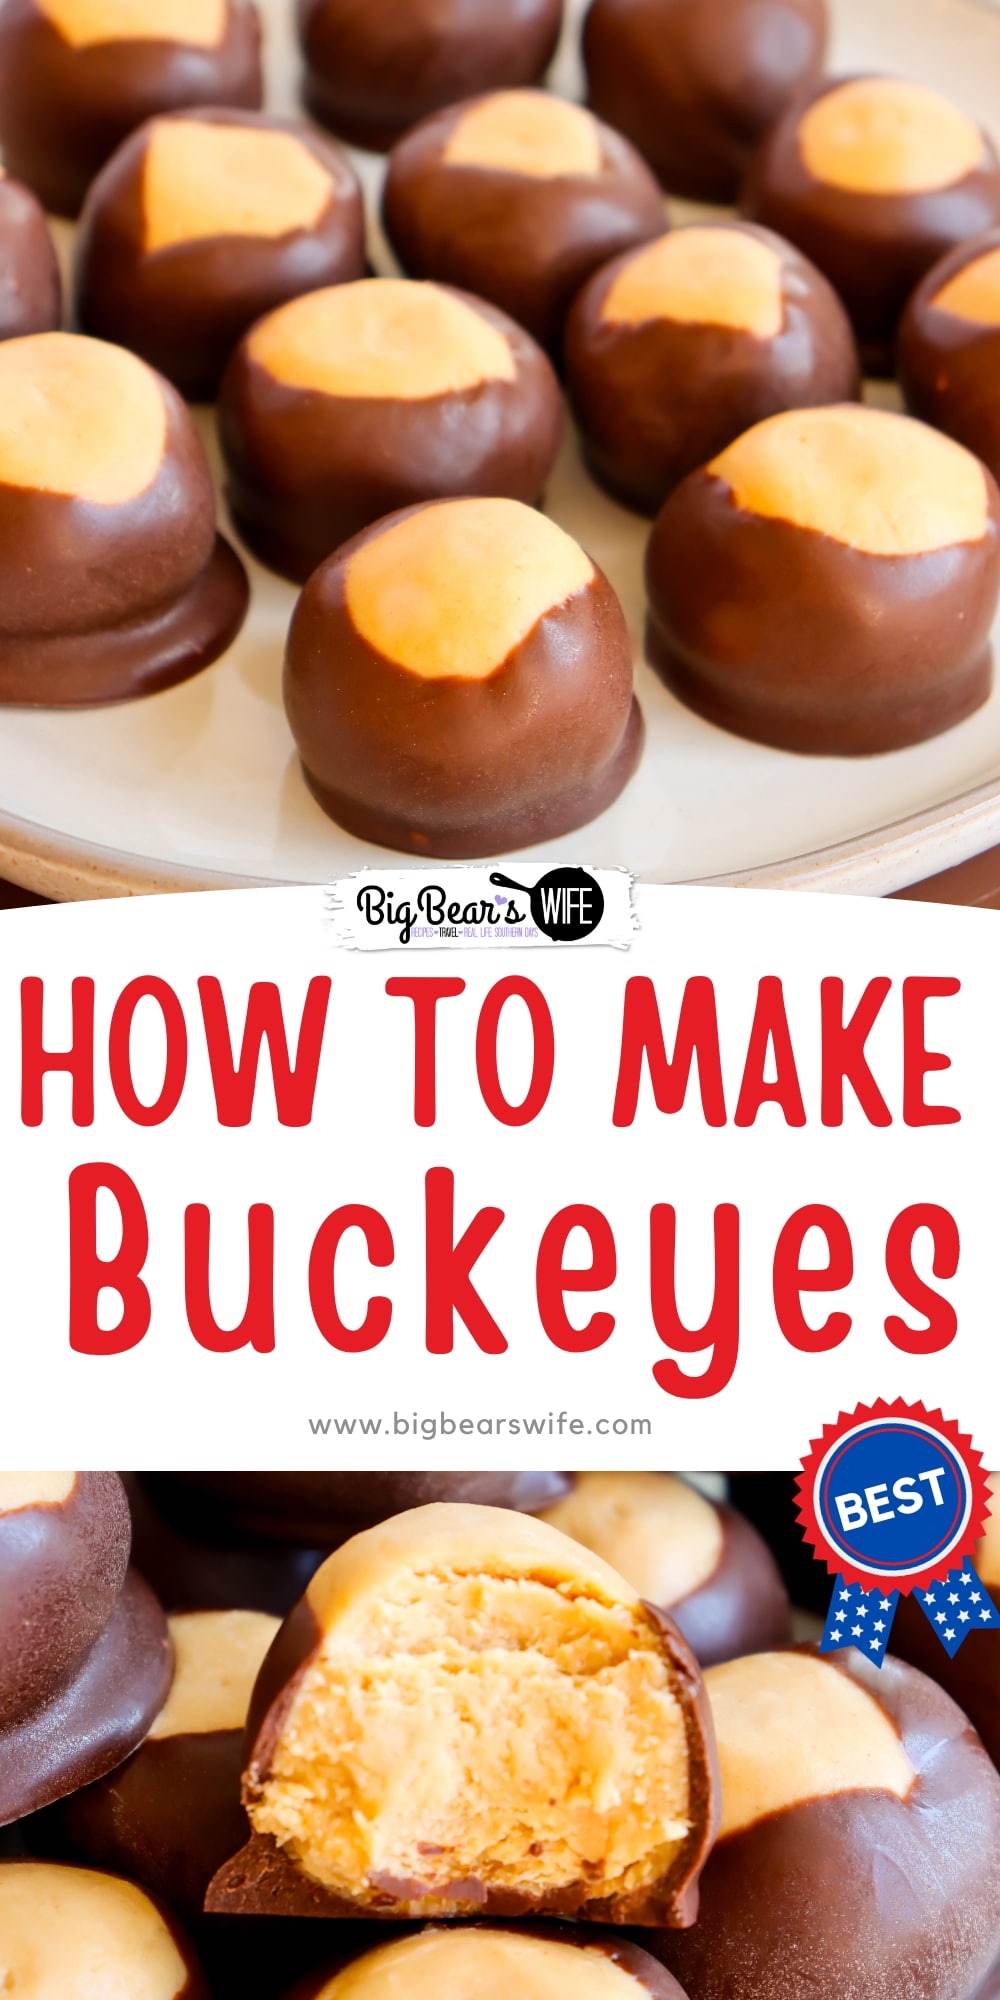 Master the art of making Buckeyes with this foolproof recipe that will make you feel like a professional pastry chef. From perfectly creamy peanut butter centers to smooth chocolate coatings, we'll guide you through each step of making this classic treat to ensure sweet success. via @bigbearswife